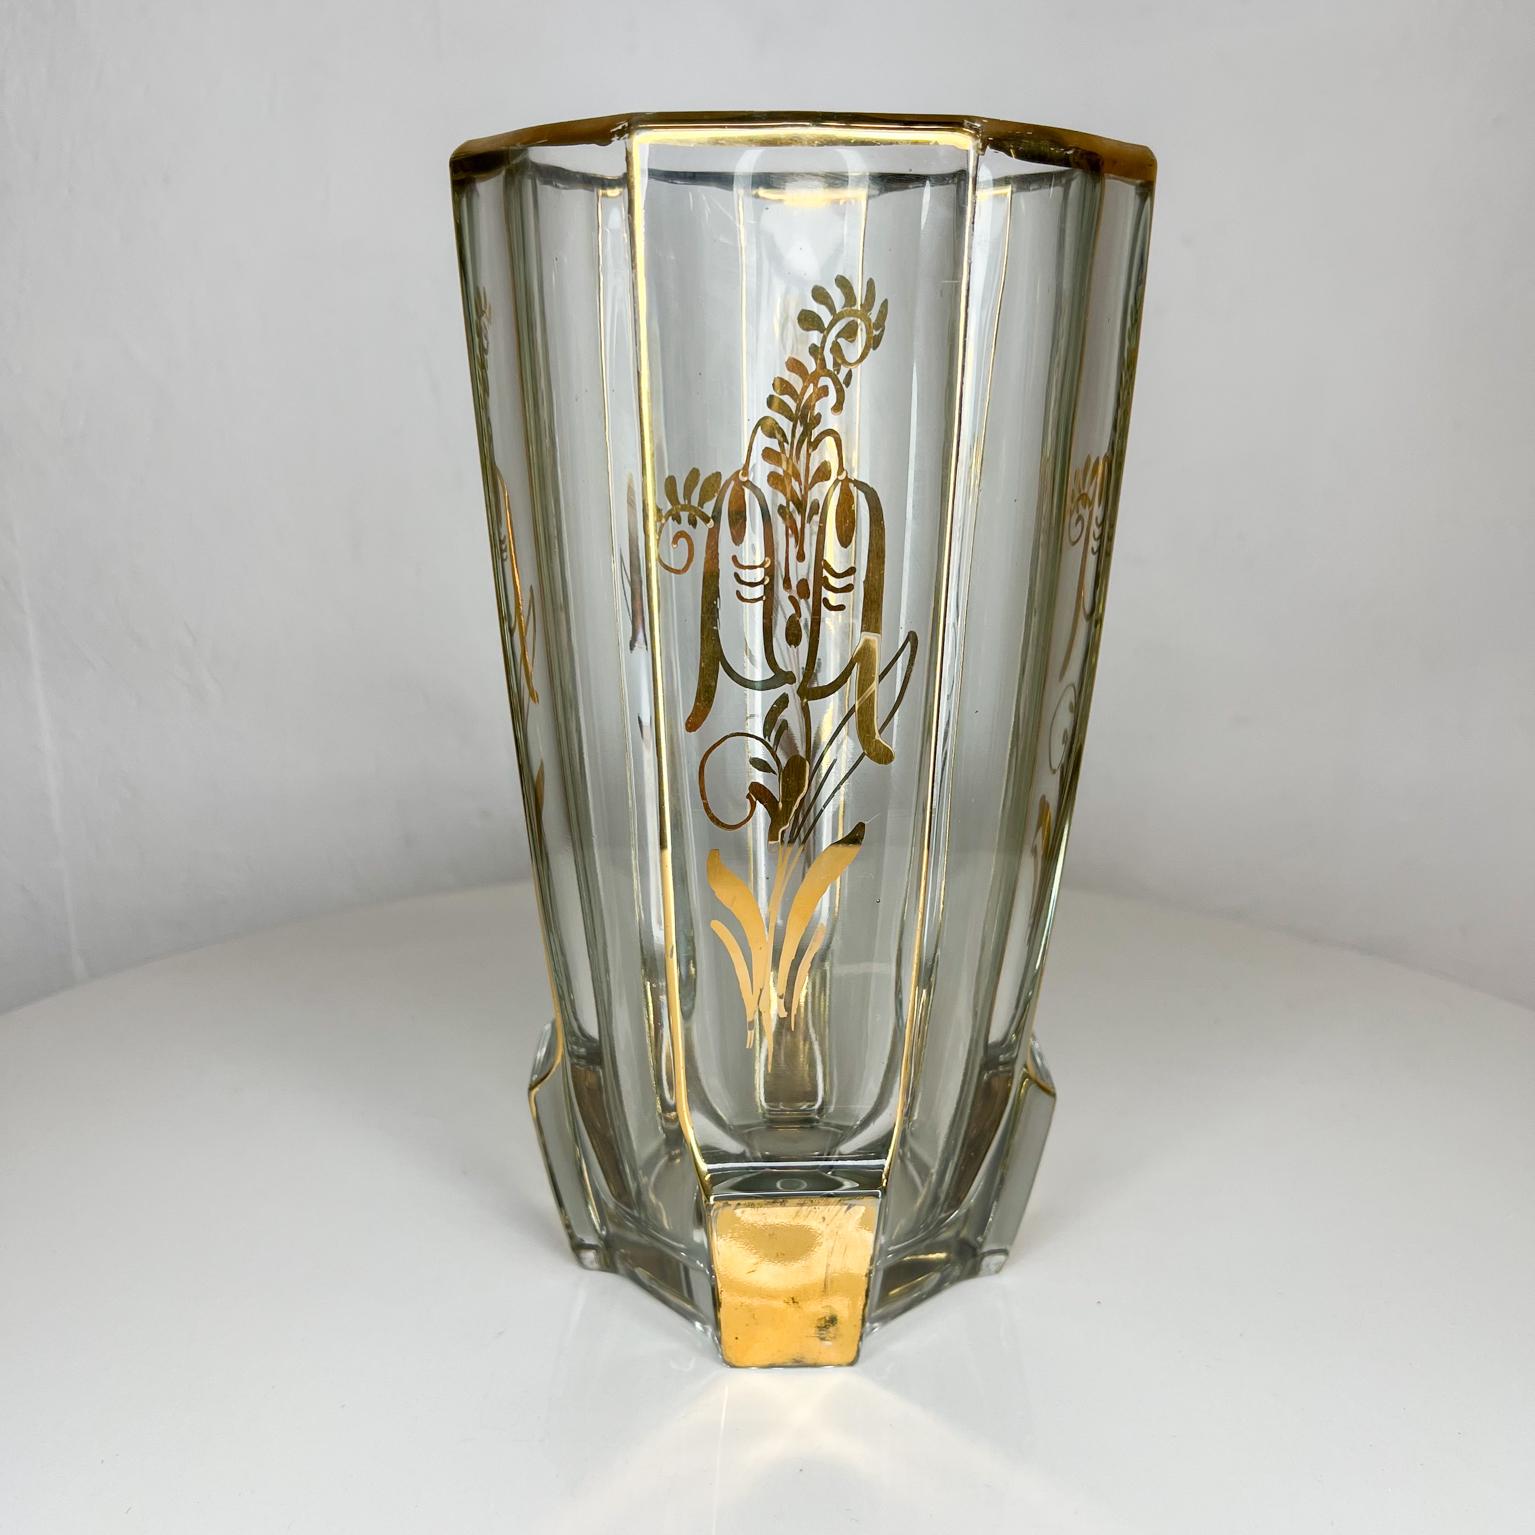 Mid-20th Century 1960s Modern Hollywood Regency Stunning Glass Vase with Gold Painted Motif